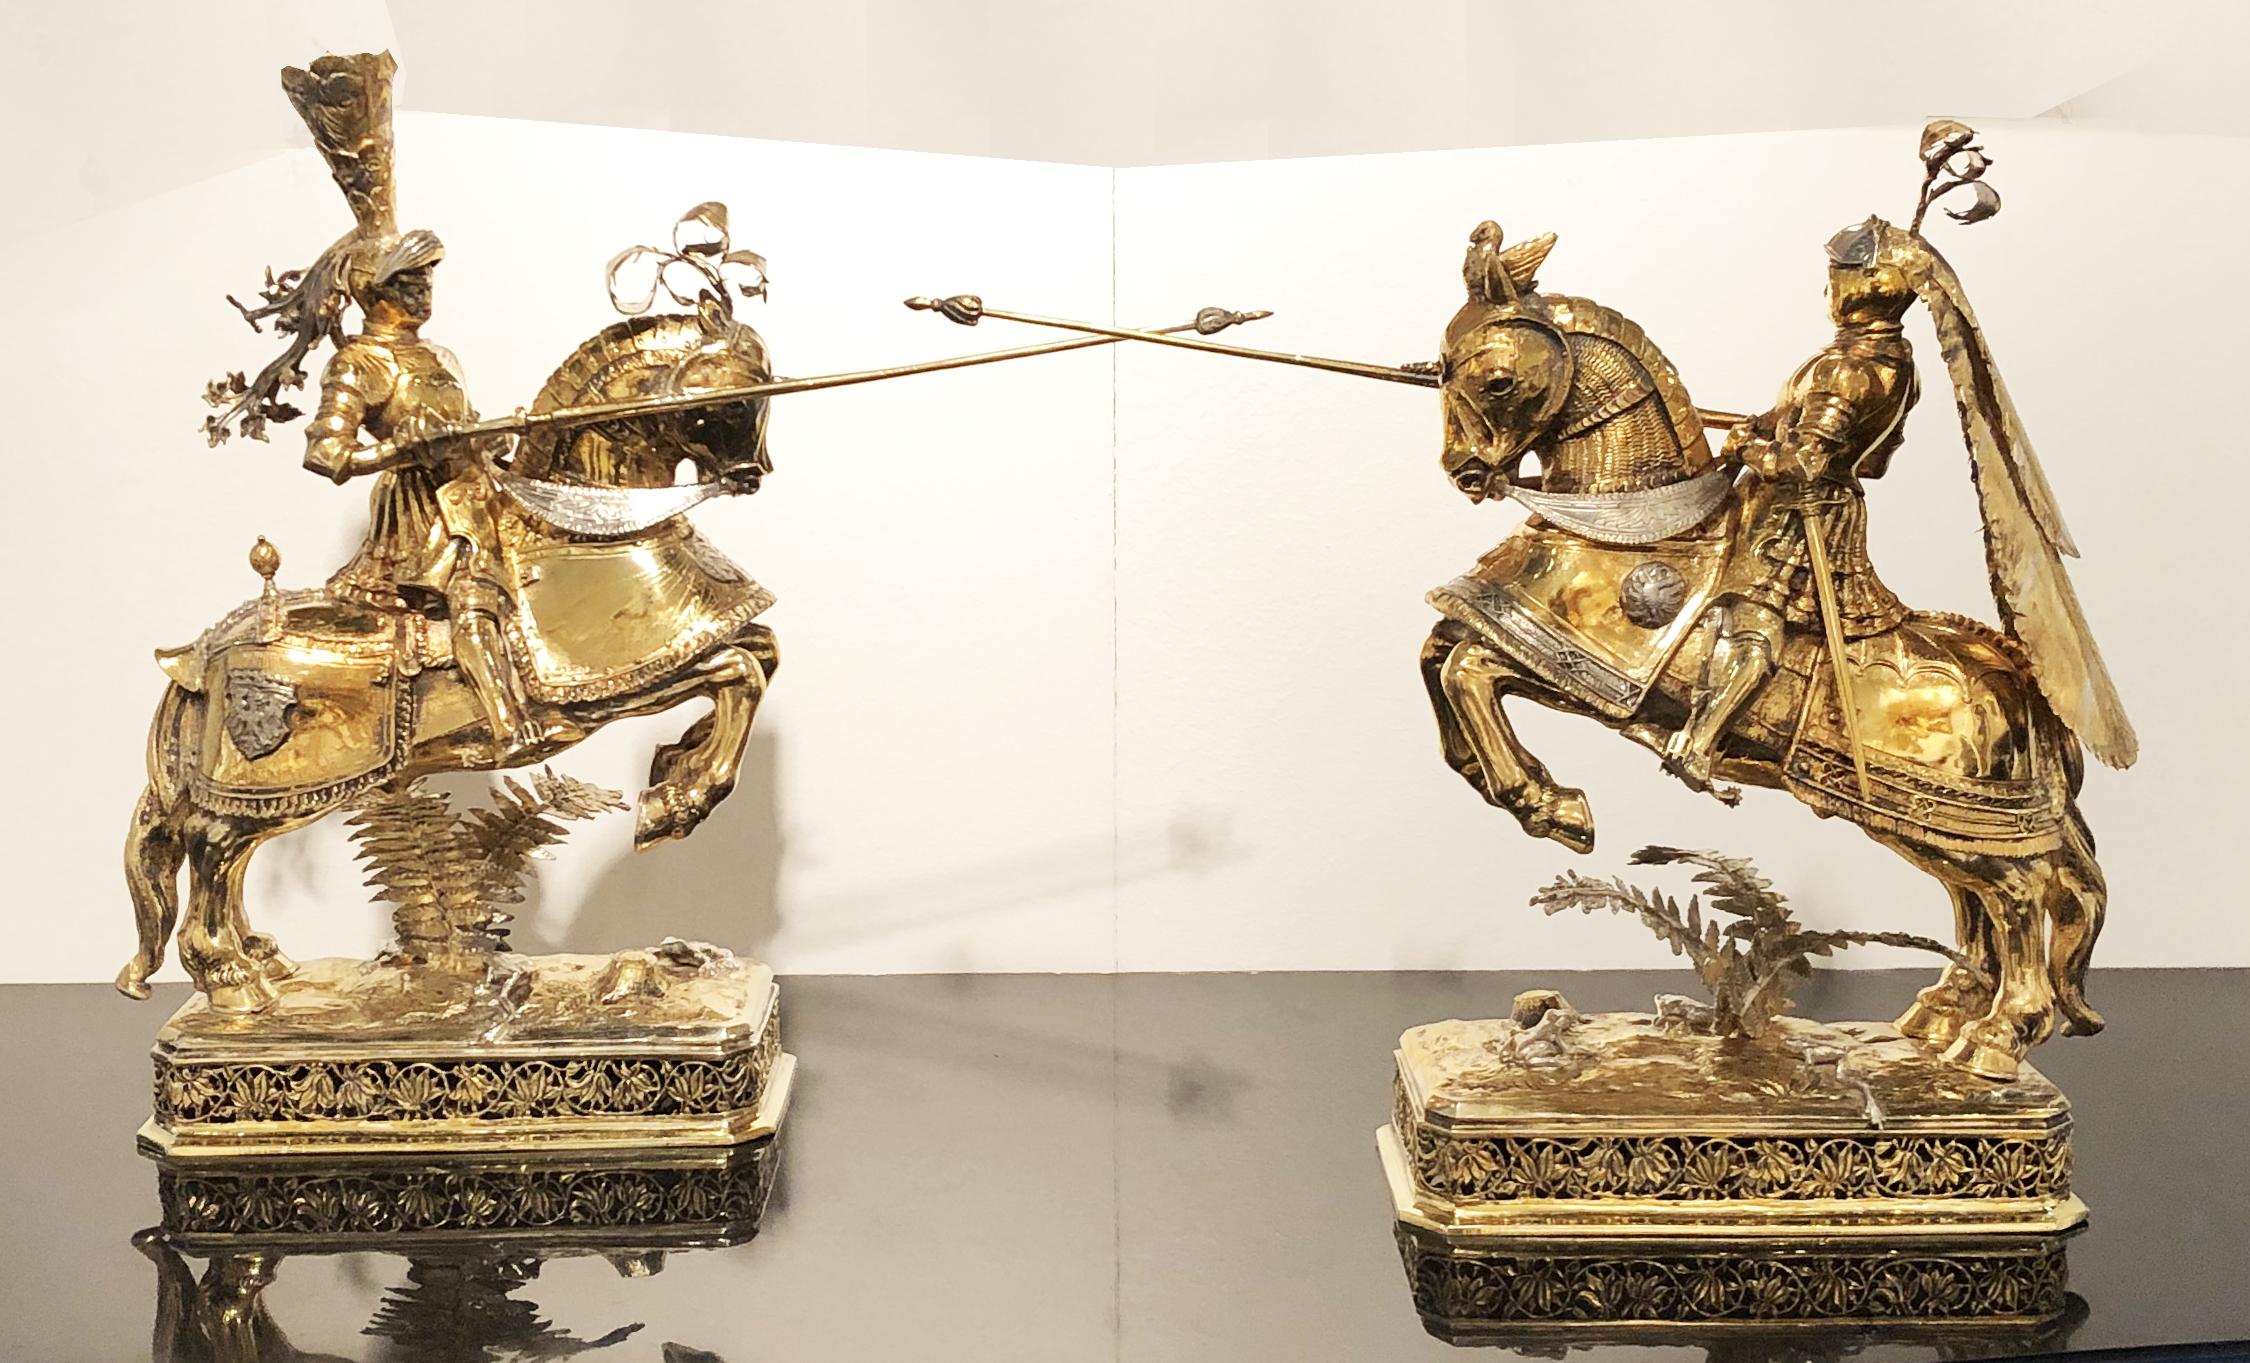 A very rare pair of German sculptures of knights, made in vermeil a middle way between silver and gold, more precious than silver but a little less precious of gold. The quality of the details and the excellence of the work shows a real pair of